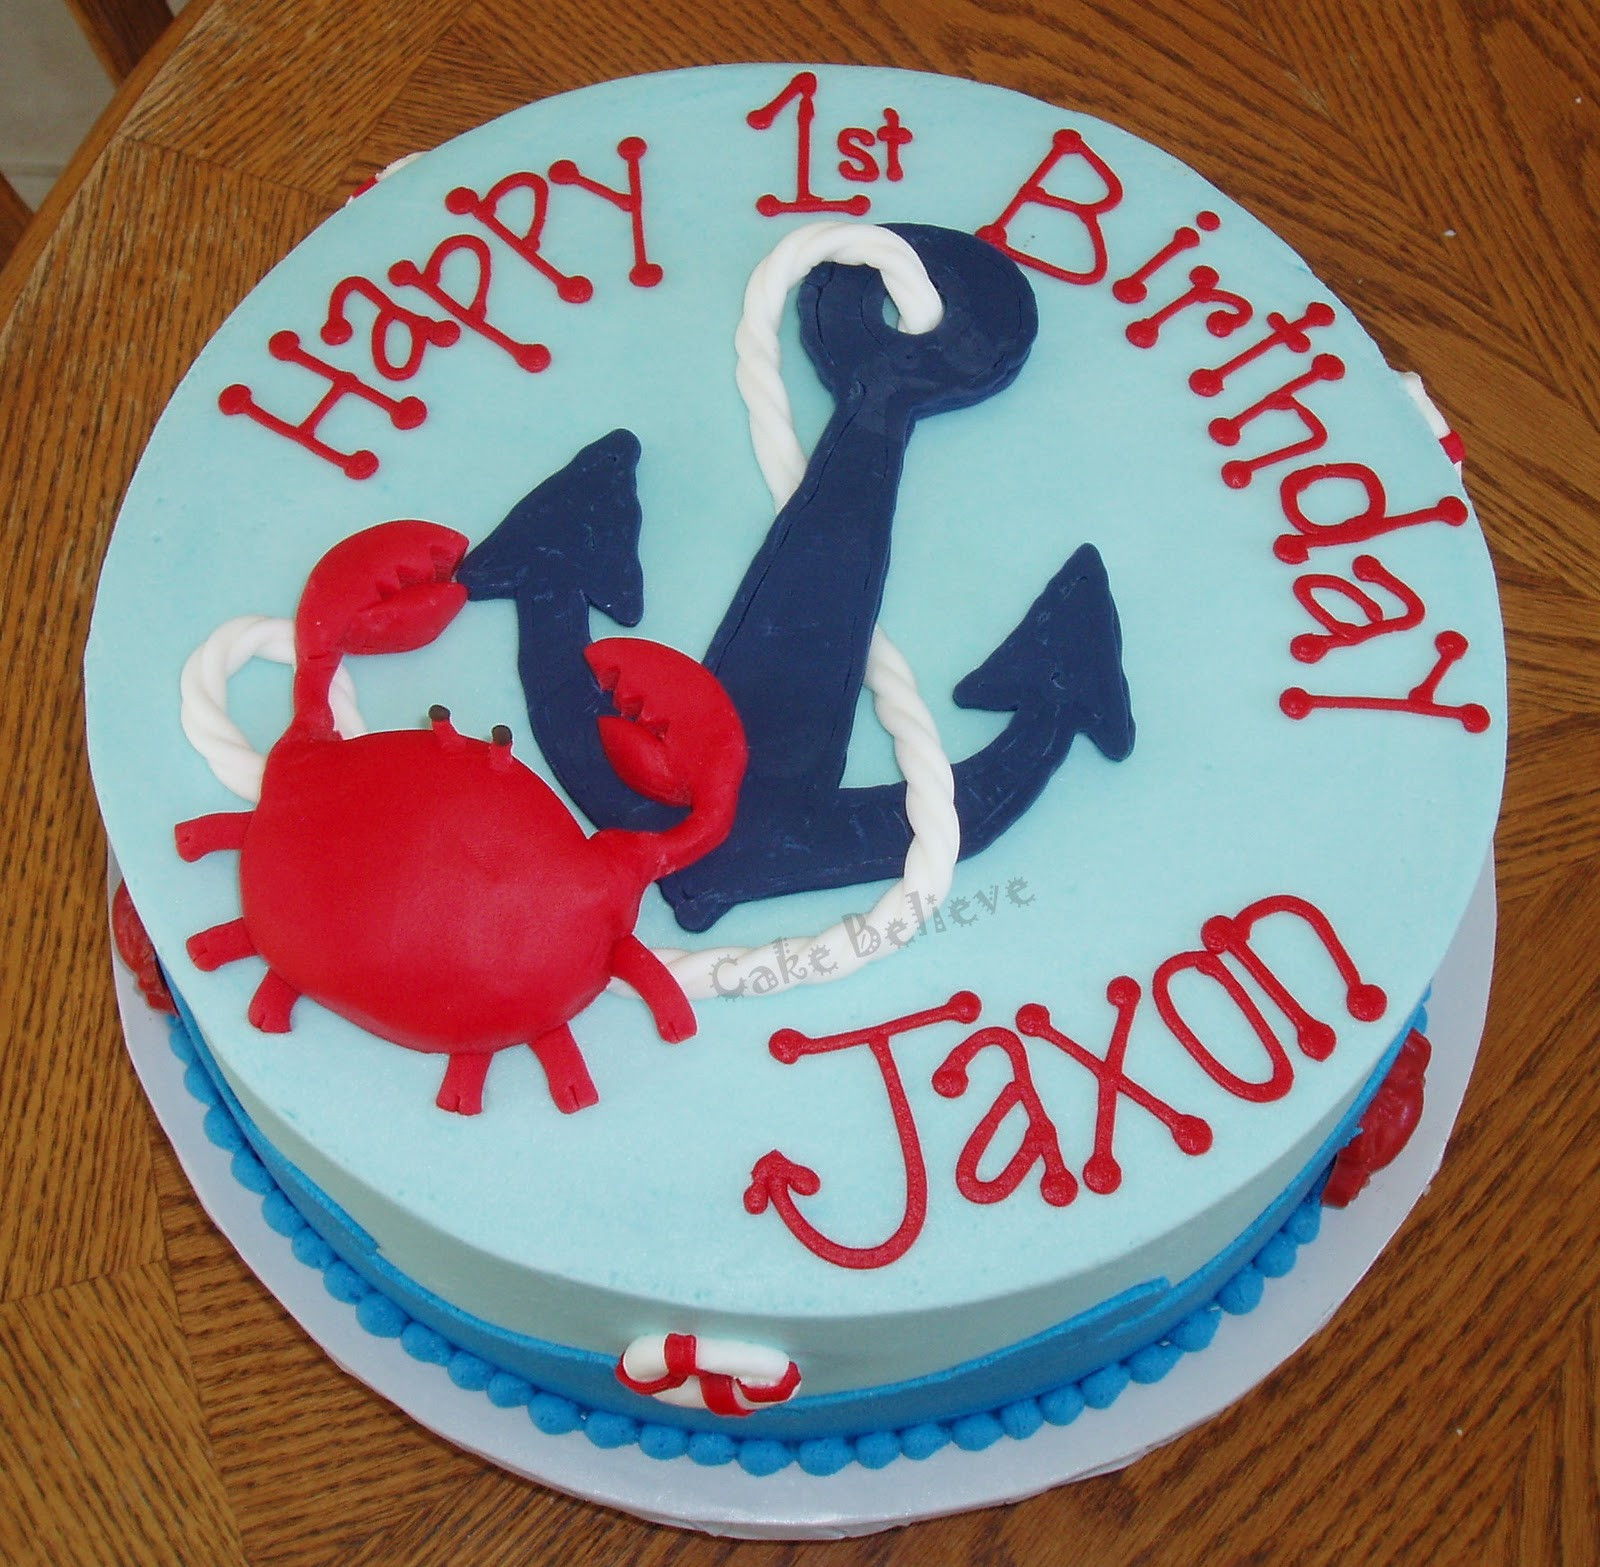 Anchor Birthday Cakes
 Cake Believe Anchors Aweigh First Birthday